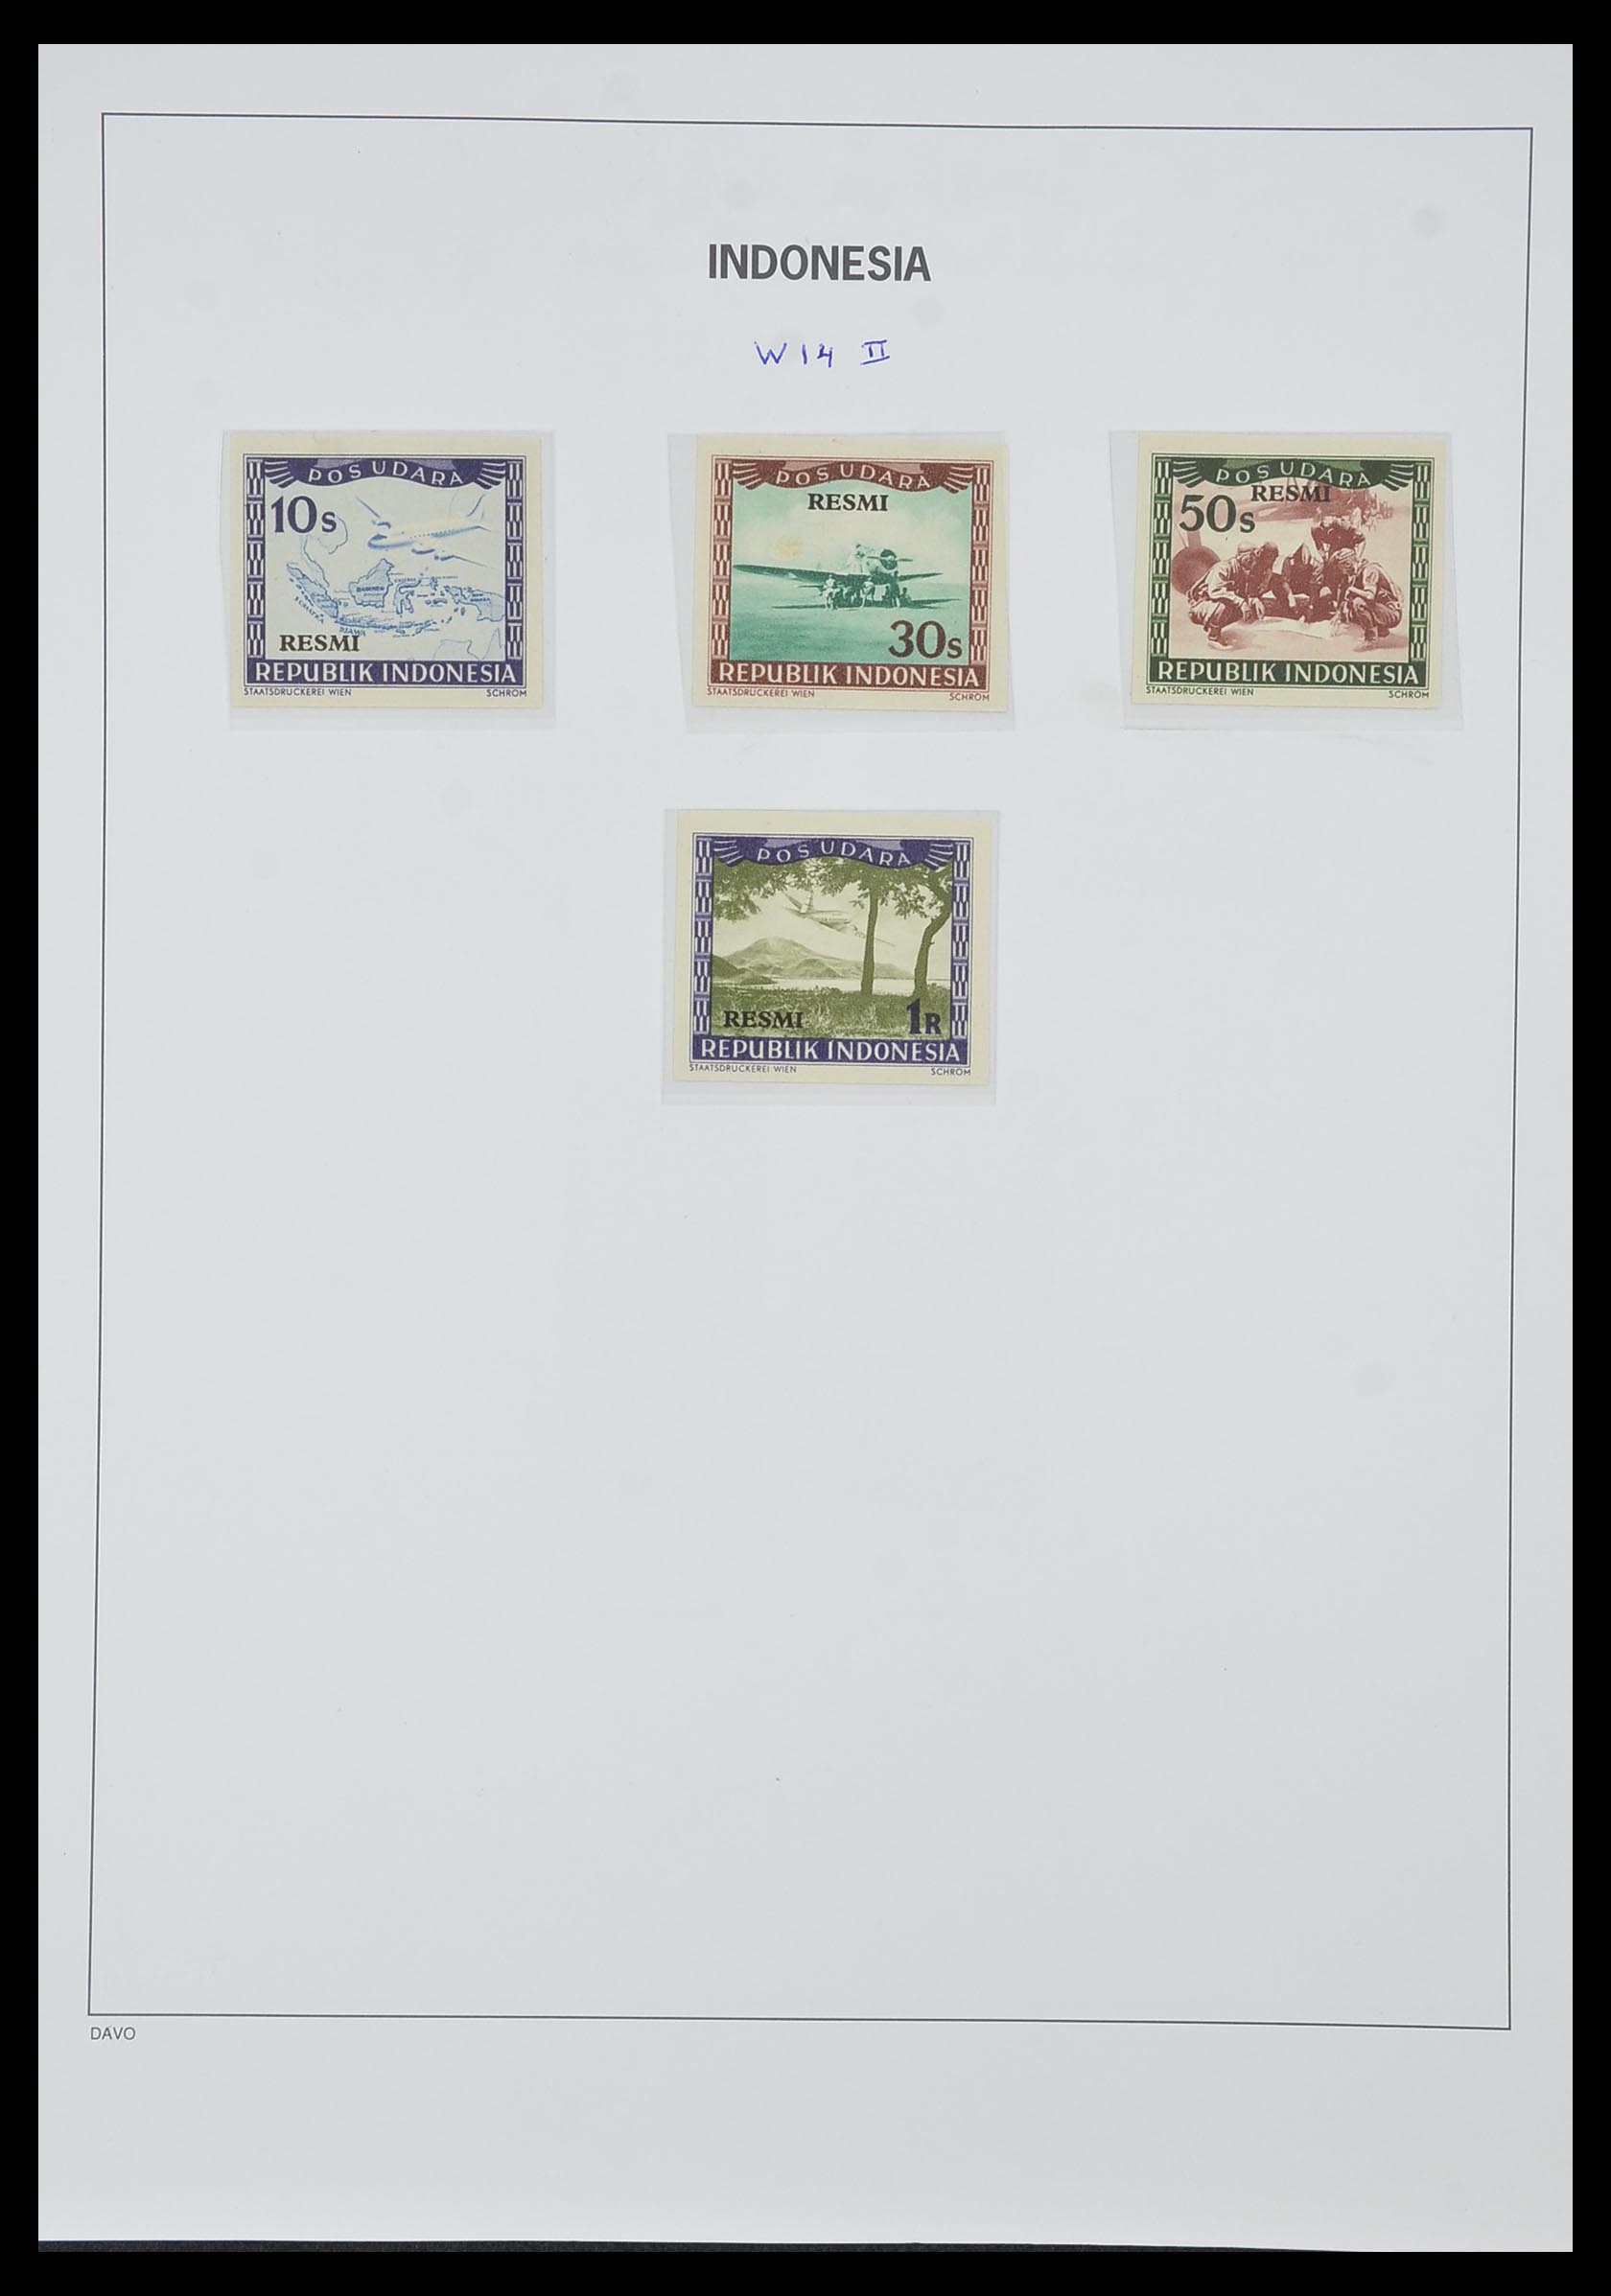 33988 024 - Stamp collection 33988 Vienna printings Indonesia.